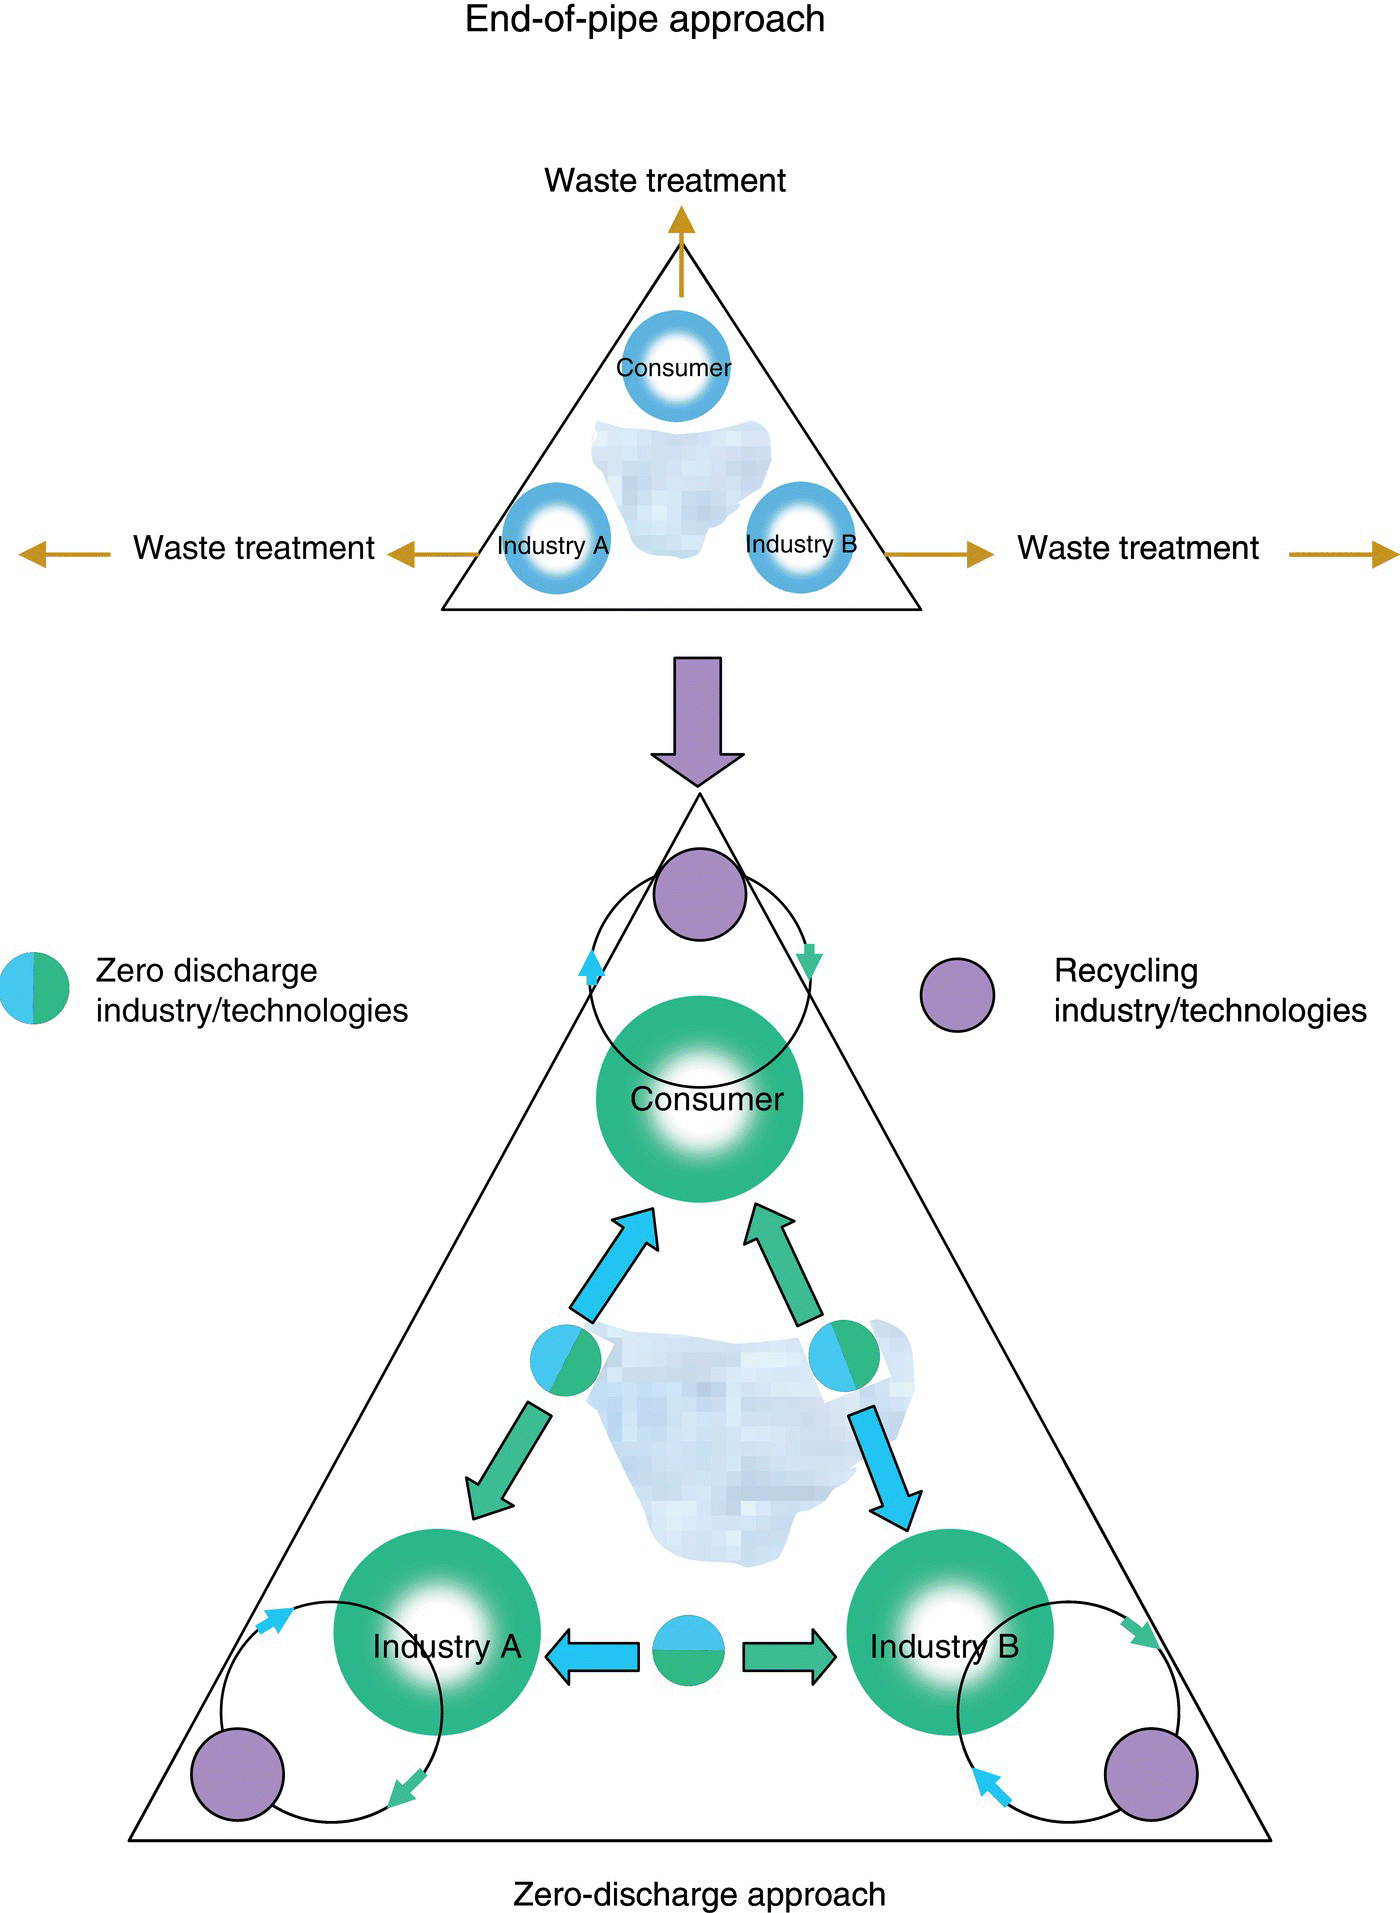 Schematic diagram of end-of-pipe and Zero-Emission approaches depicted by a small triangle at the top and a big triangle at the bottom, both containing a map with 3 circles for consumer, industry A, and industry B.